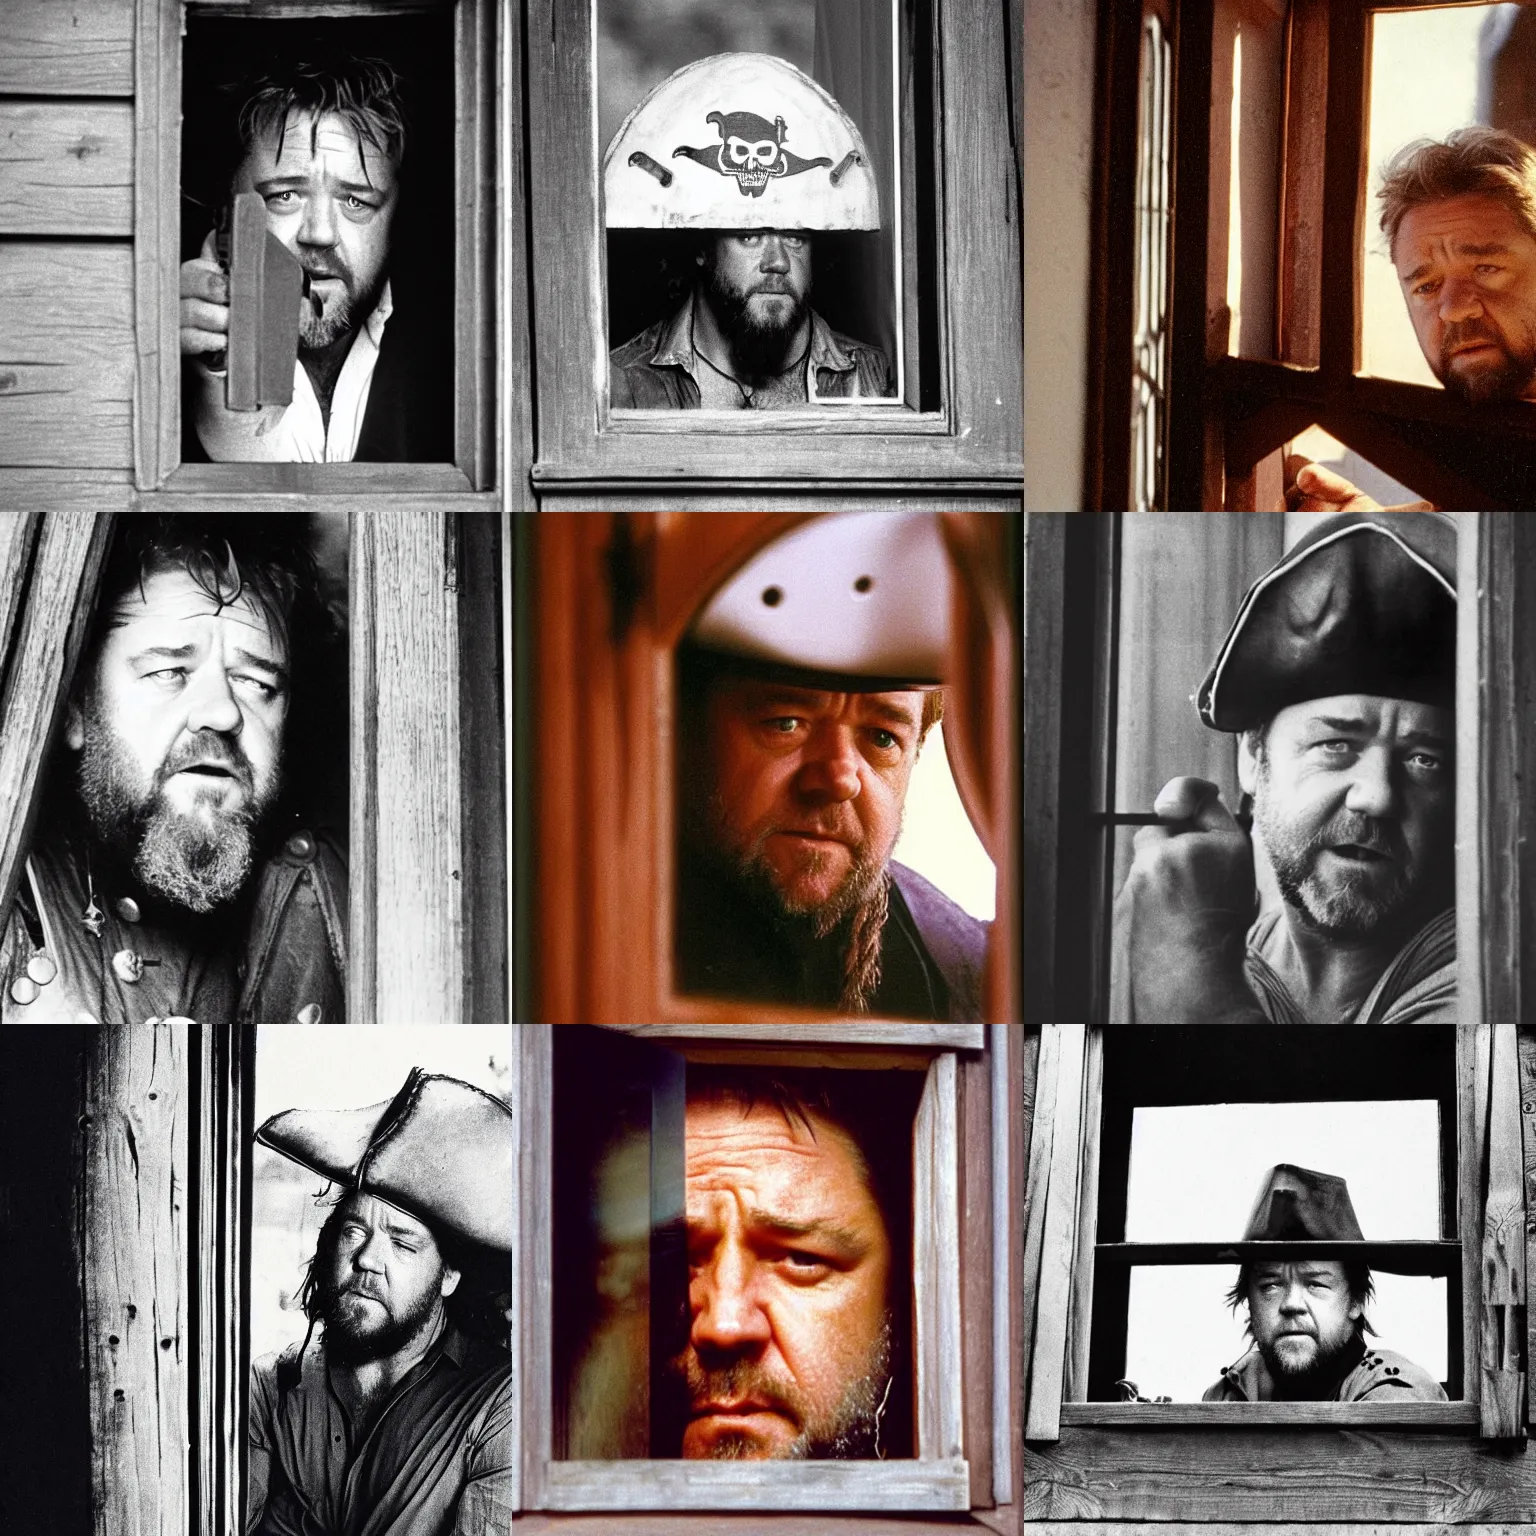 Prompt: russell crowe with large pirate hat peering out concerned down to camera from a small glass window in a wooden wall, 1 9 9 0